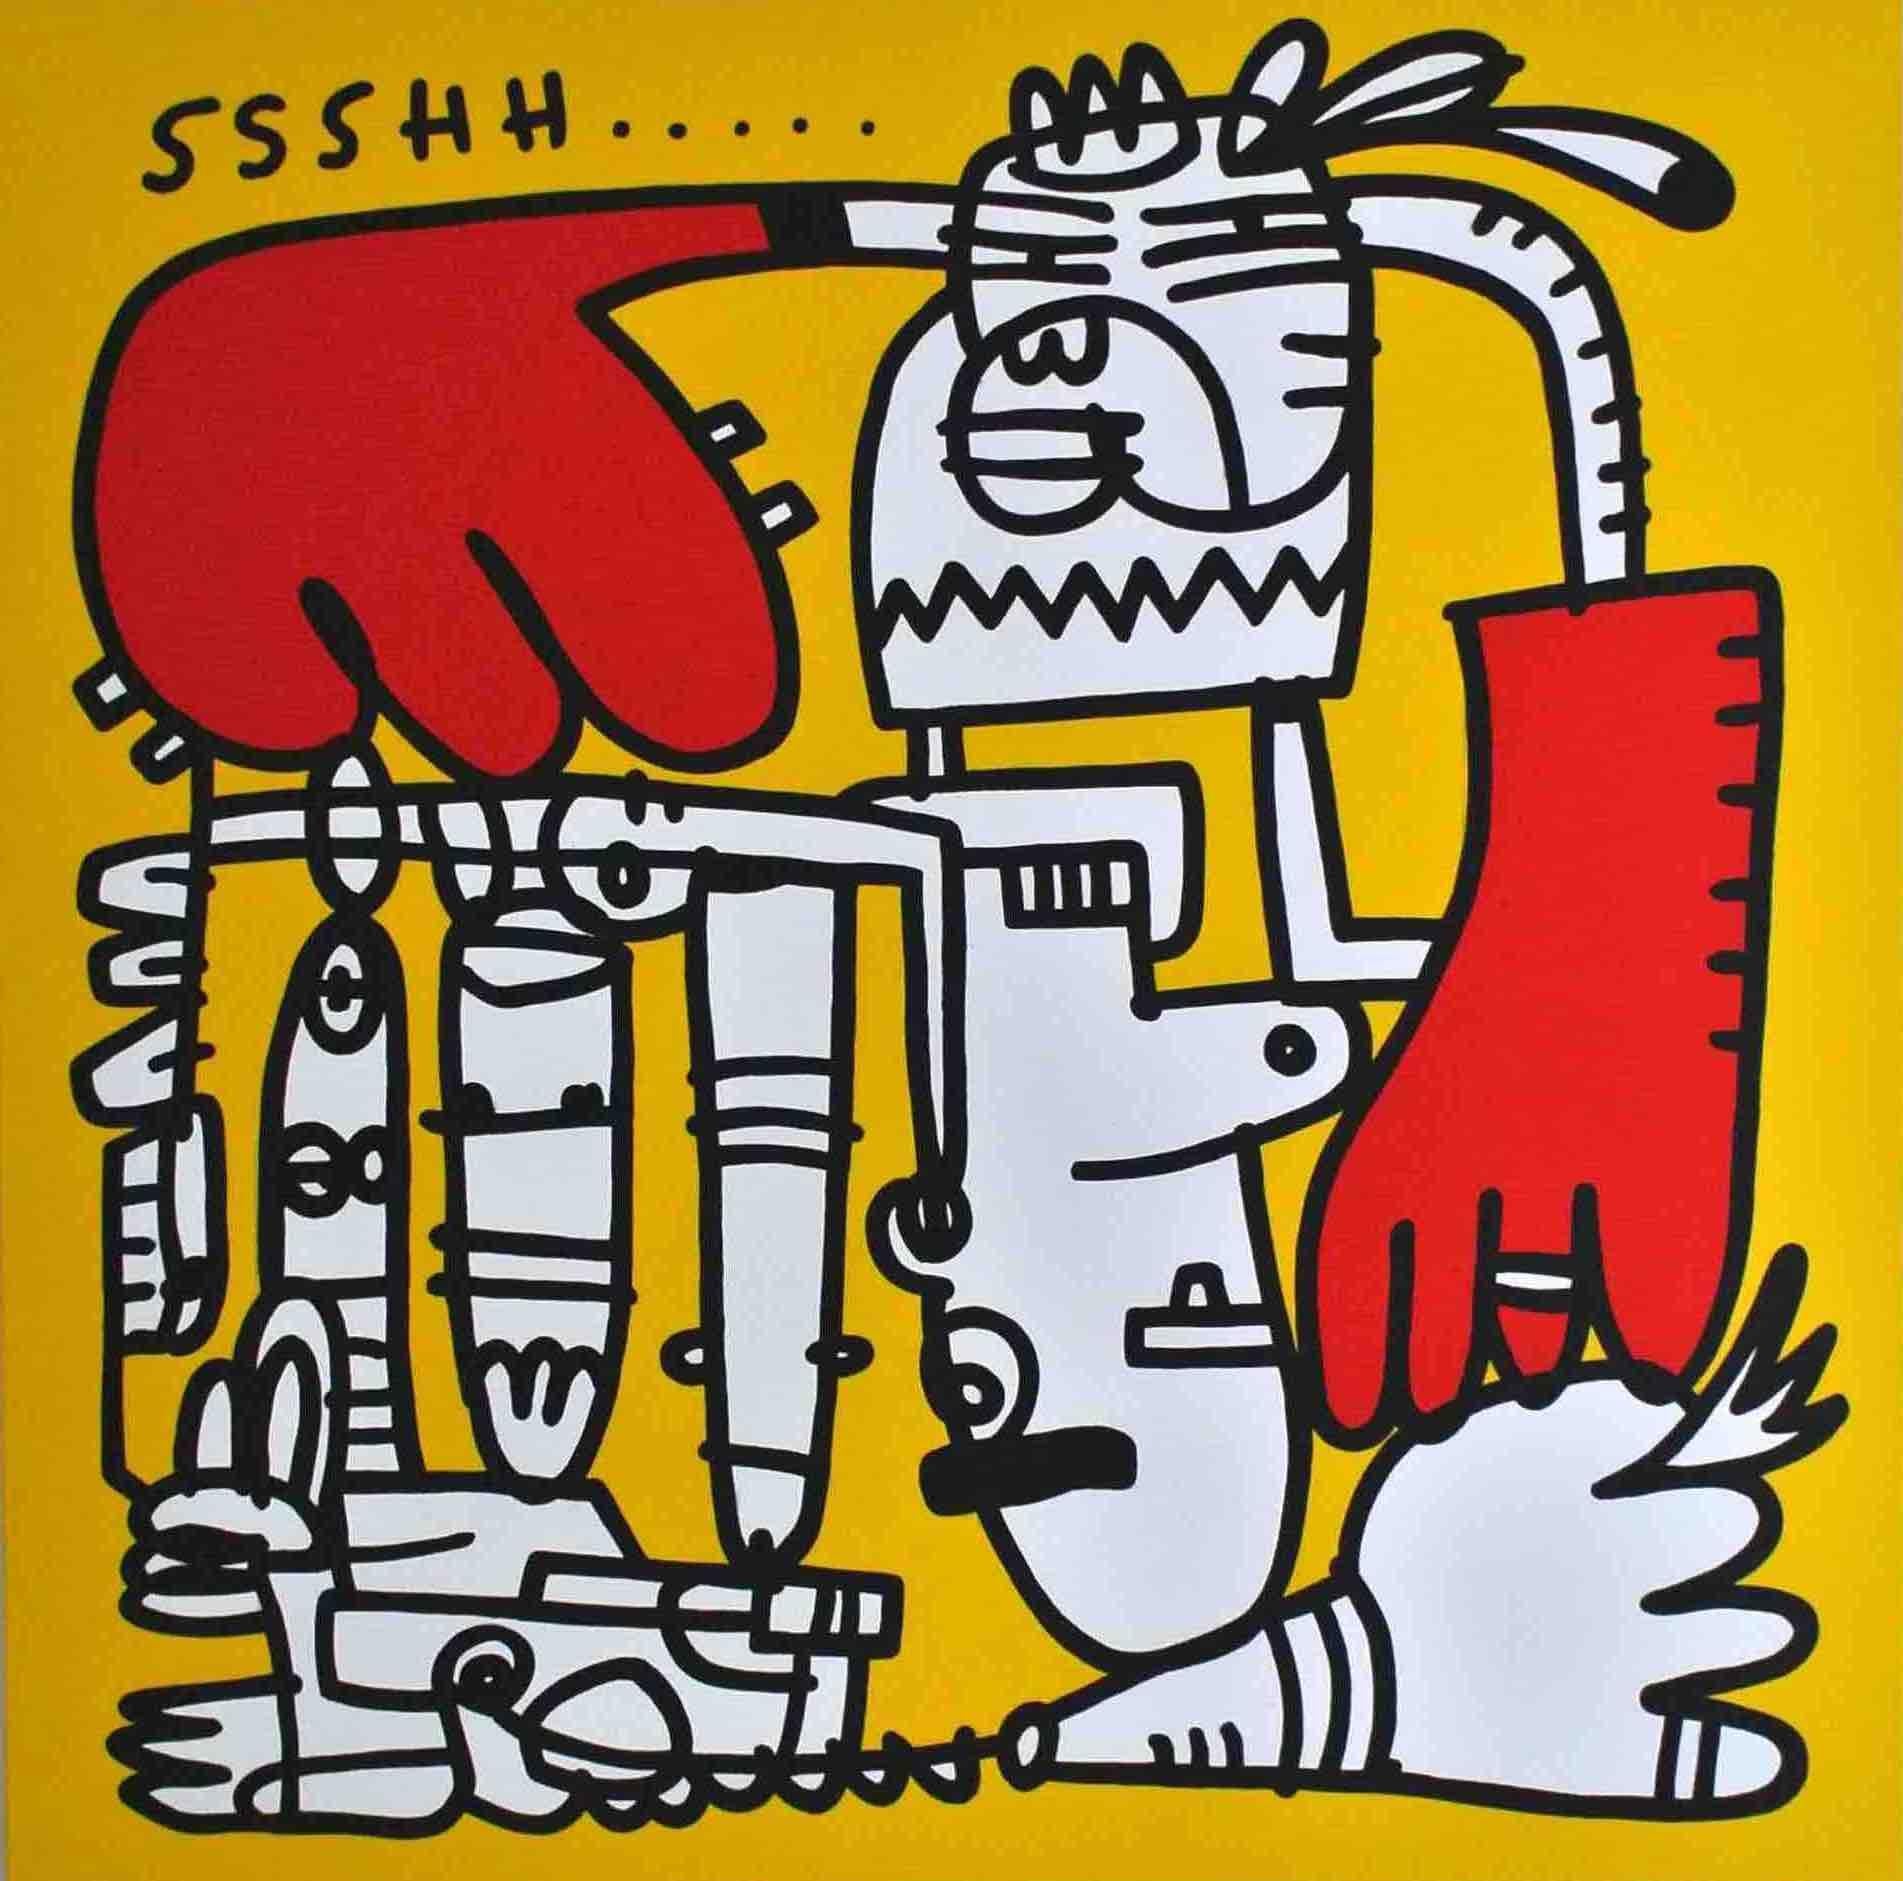 Christian Junghanns Figurative Painting - SSHHH - Pop Art Painting, Neo Pop, yellow, red, 21stC., modern art, abstract